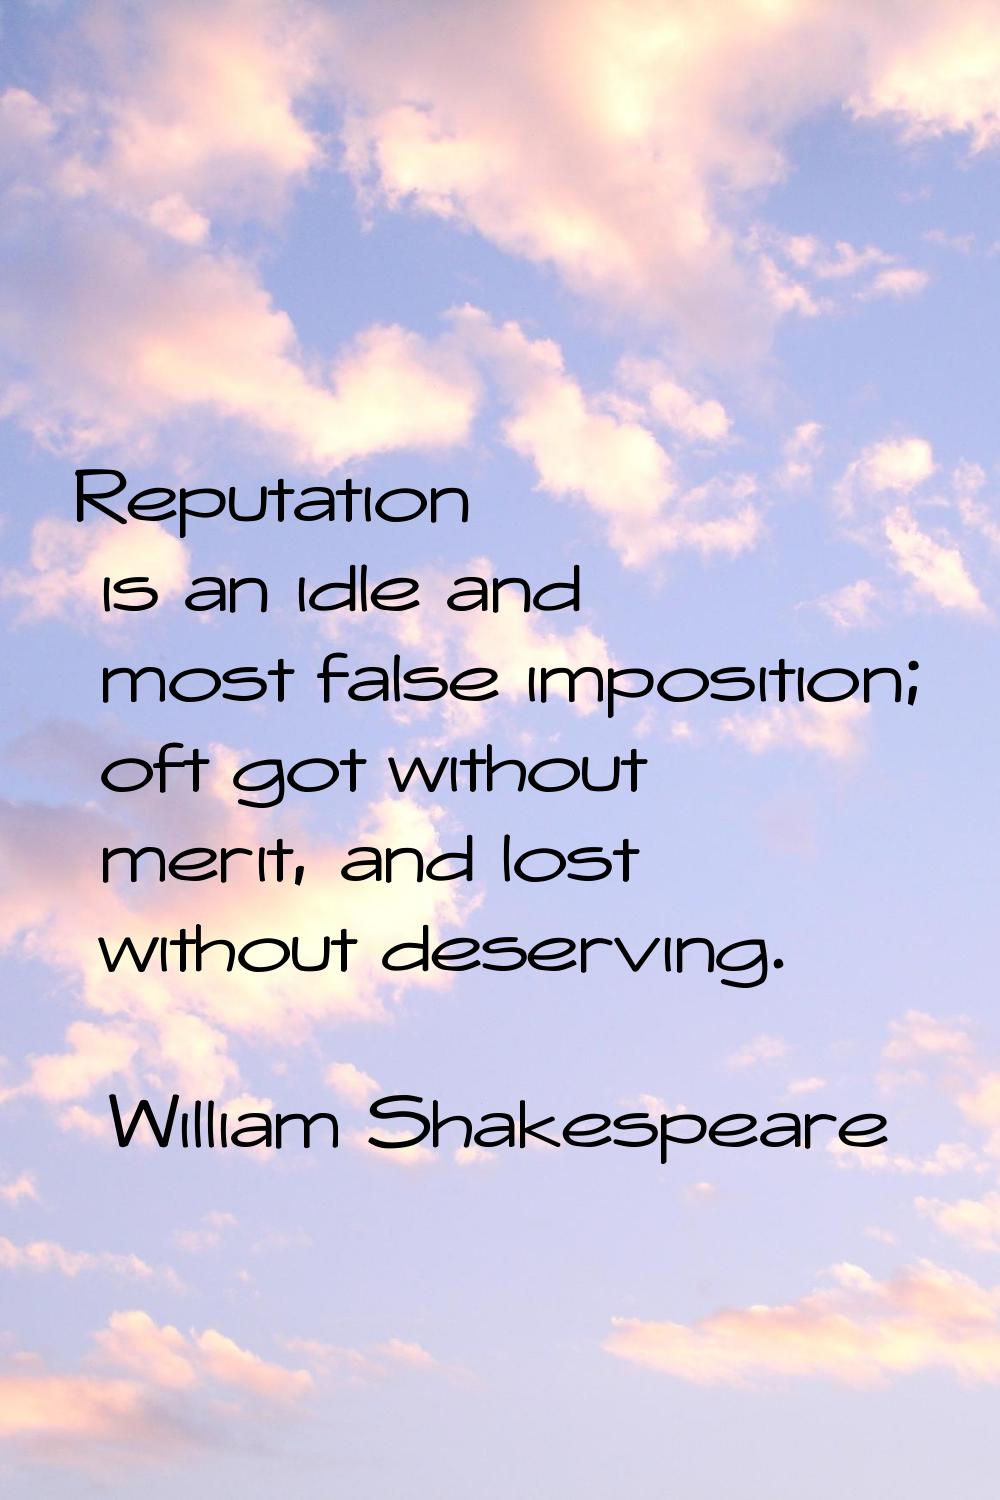 Reputation is an idle and most false imposition; oft got without merit, and lost without deserving.